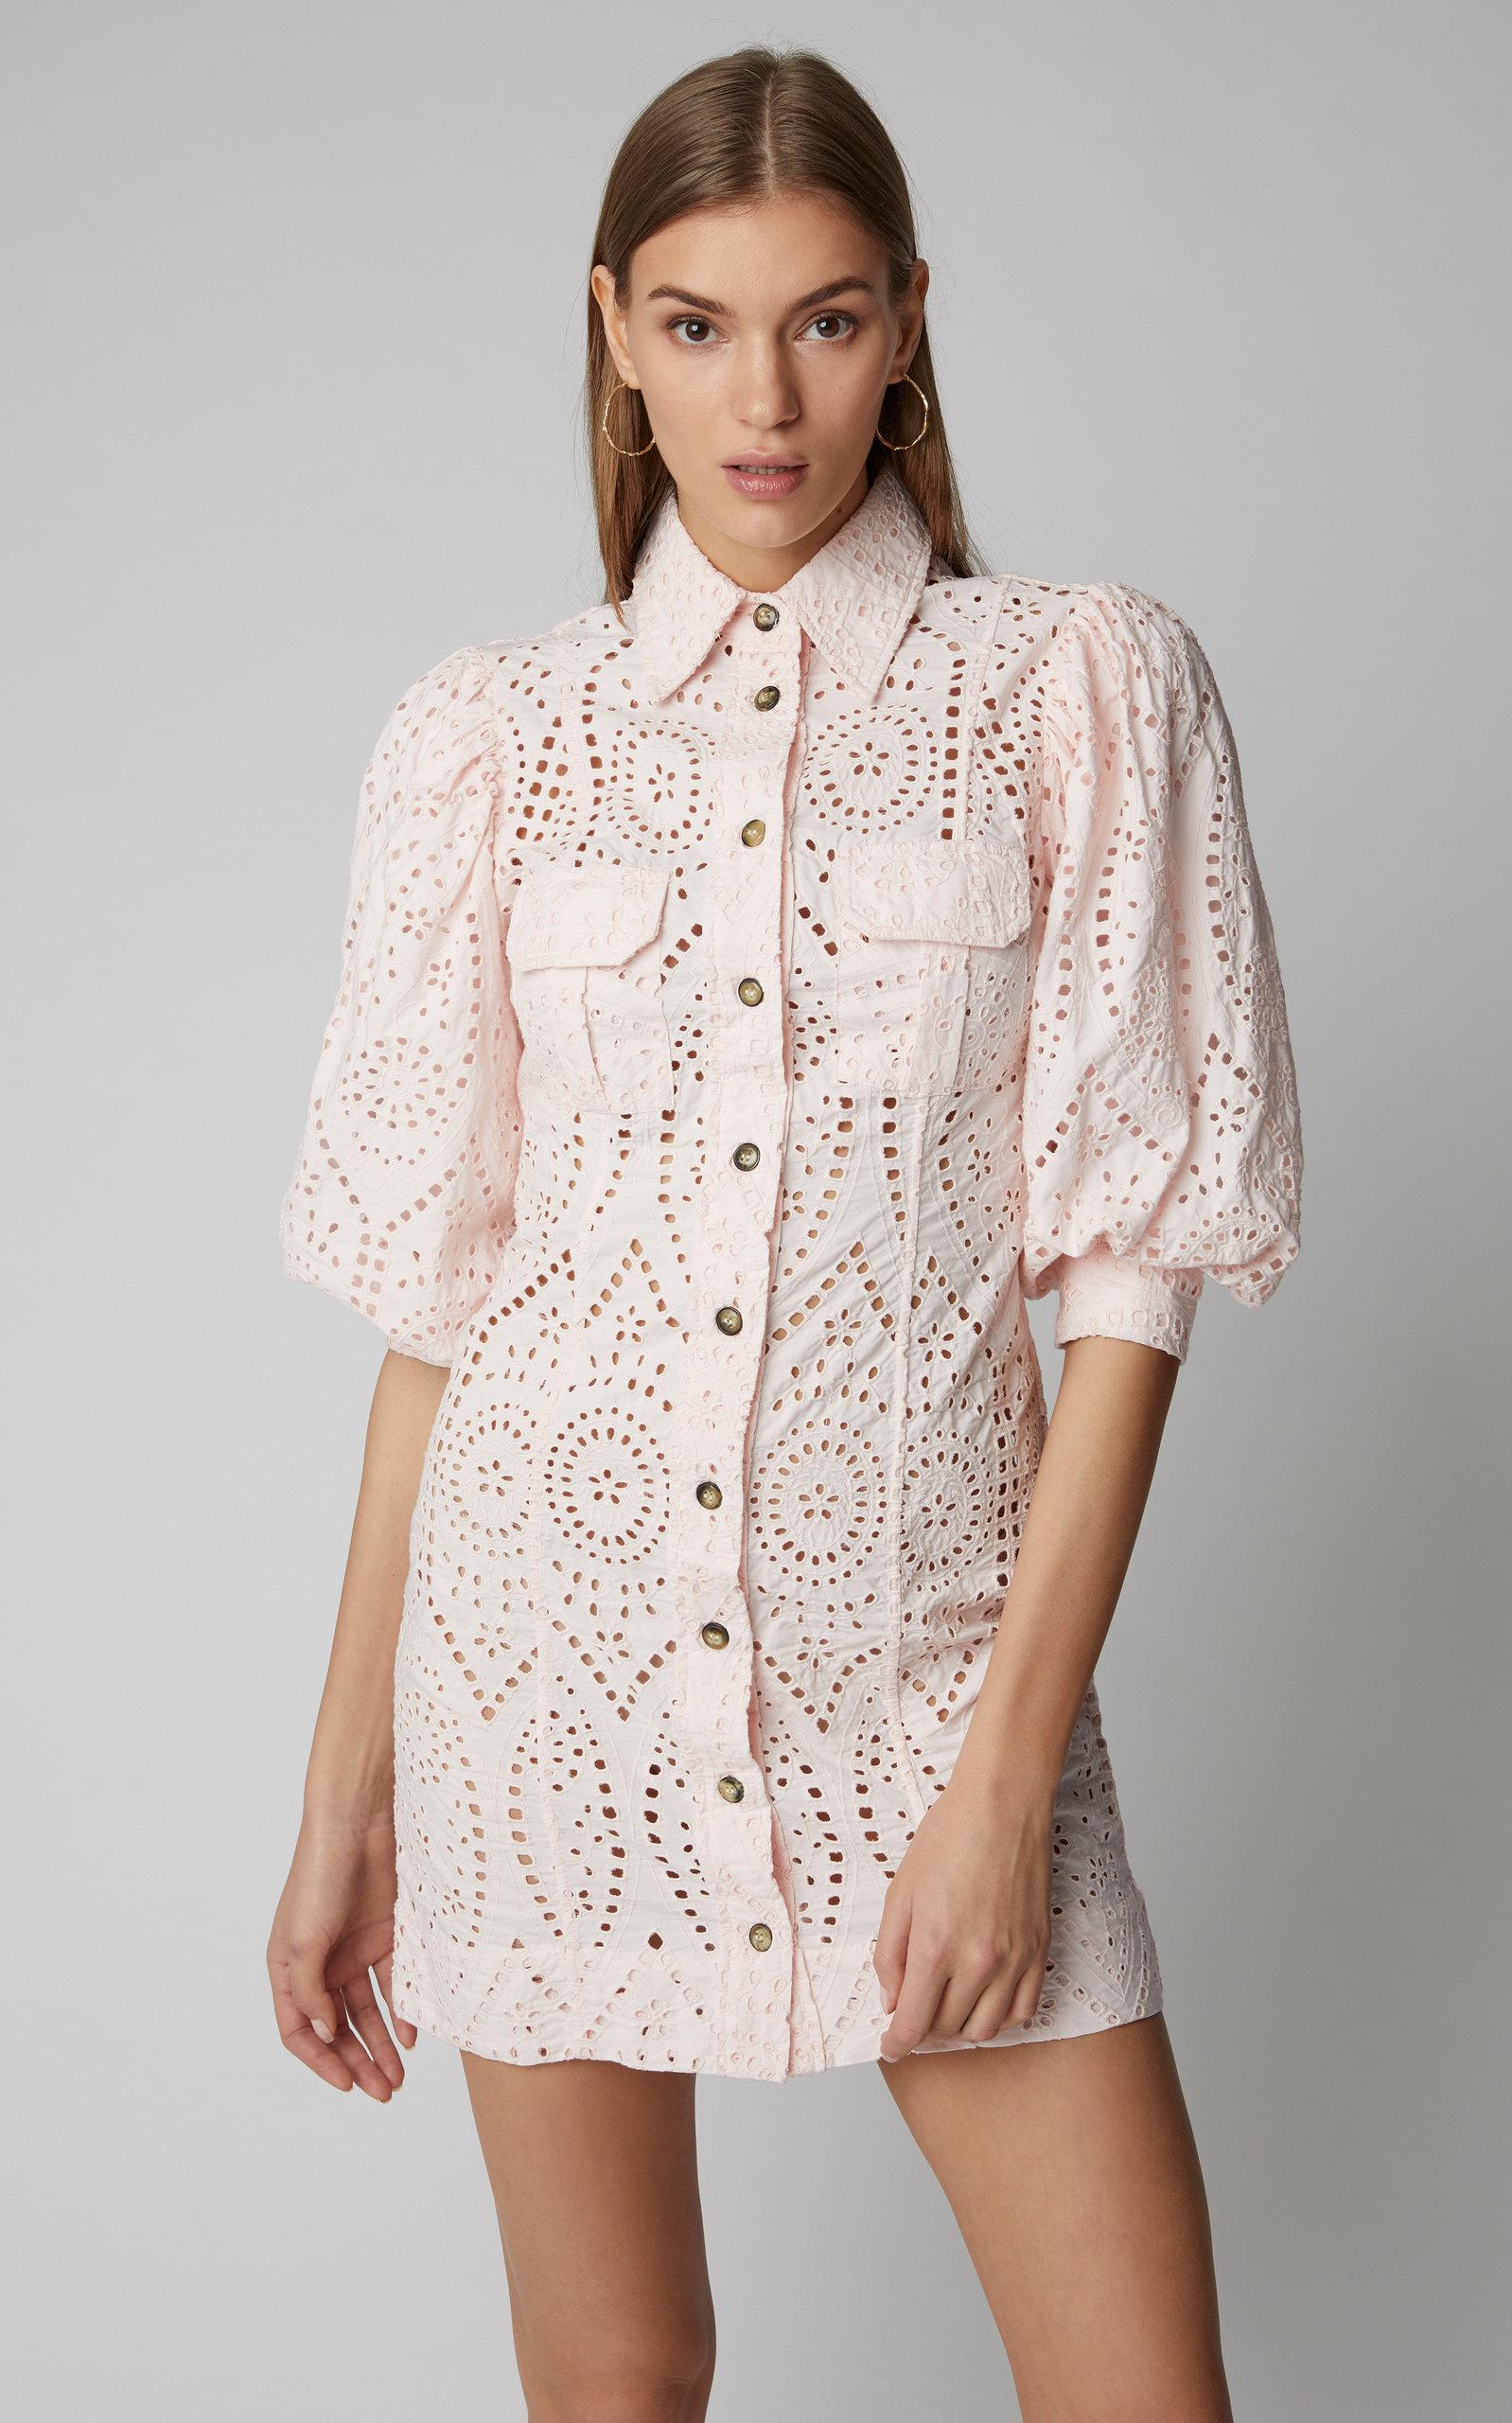 Ganni Broderie Anglaise Cotton Mini Dress in Pink - Lyst